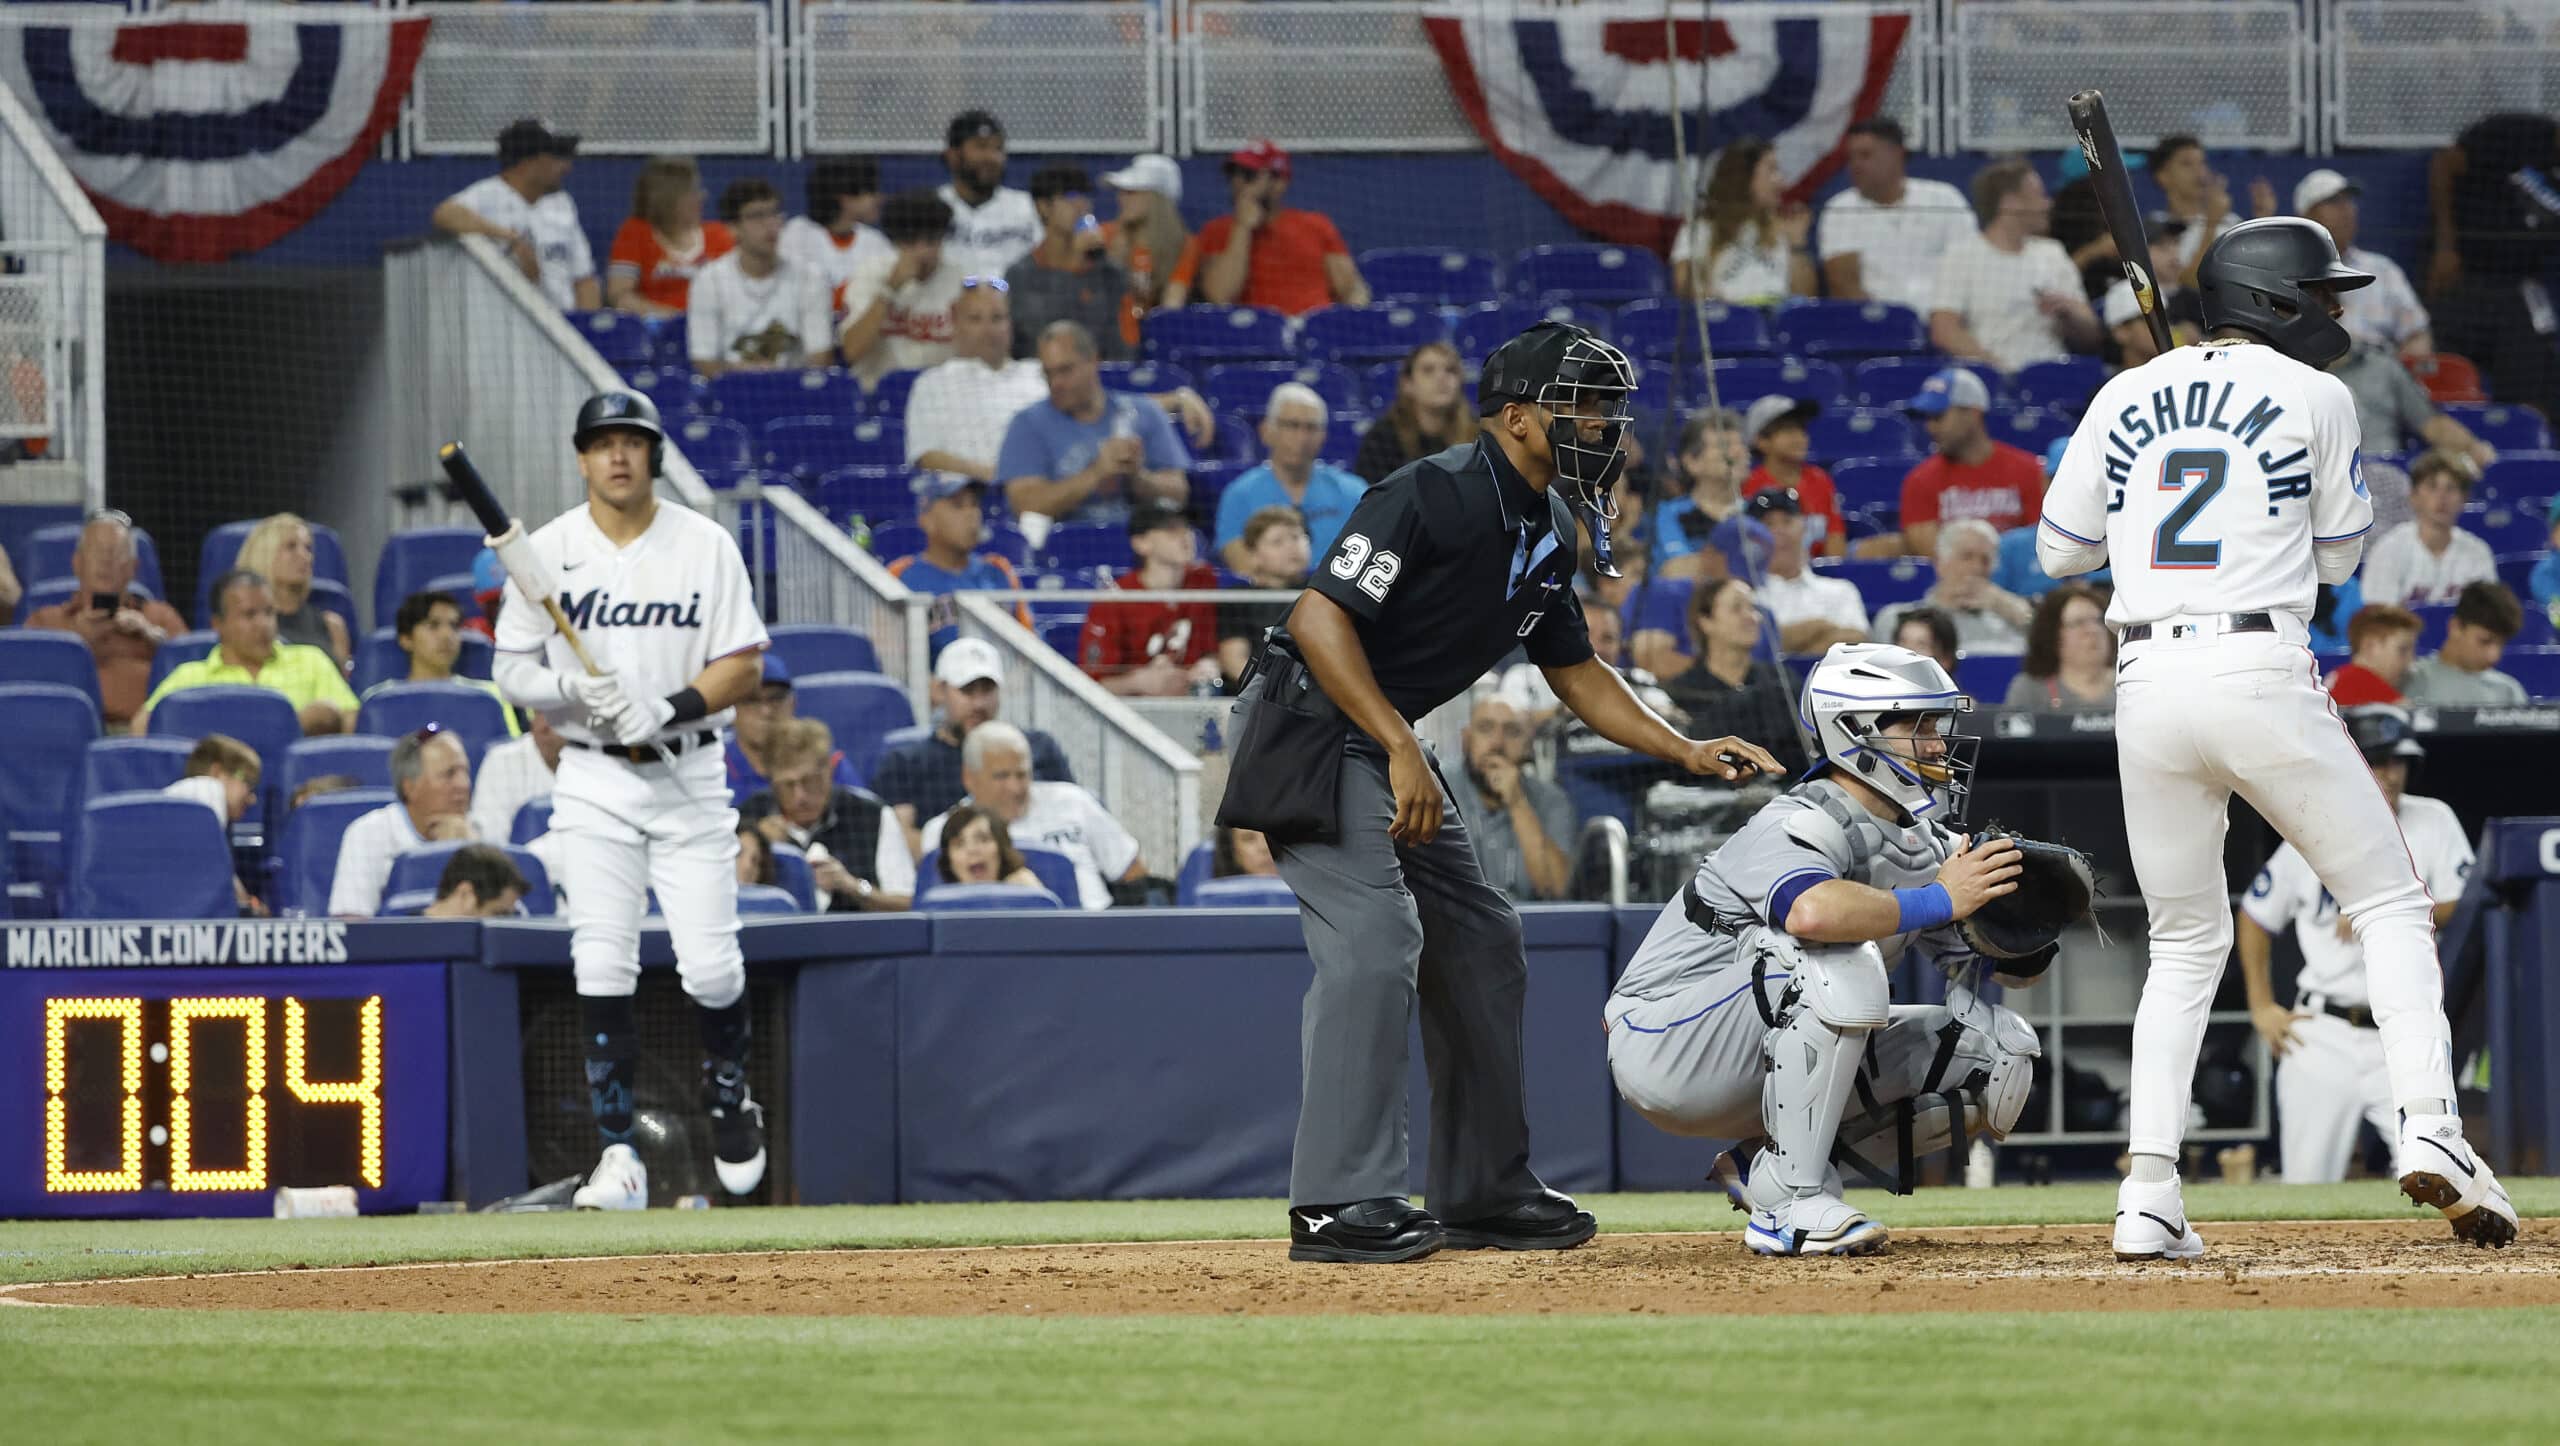 MLB Rule Changes Spur Record Opening Day MLB.TV Viewership